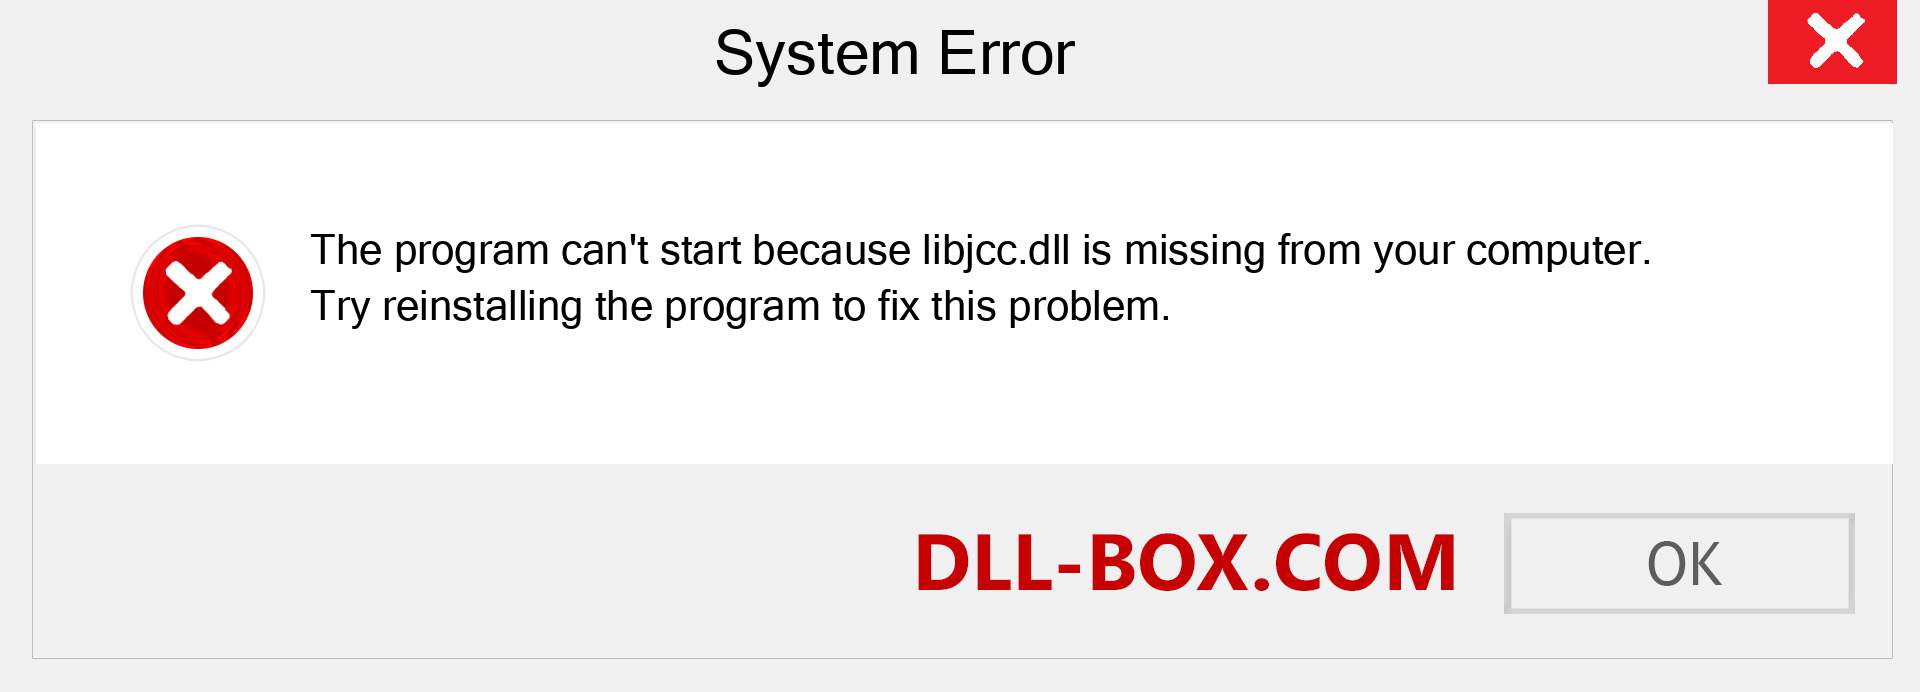  libjcc.dll file is missing?. Download for Windows 7, 8, 10 - Fix  libjcc dll Missing Error on Windows, photos, images